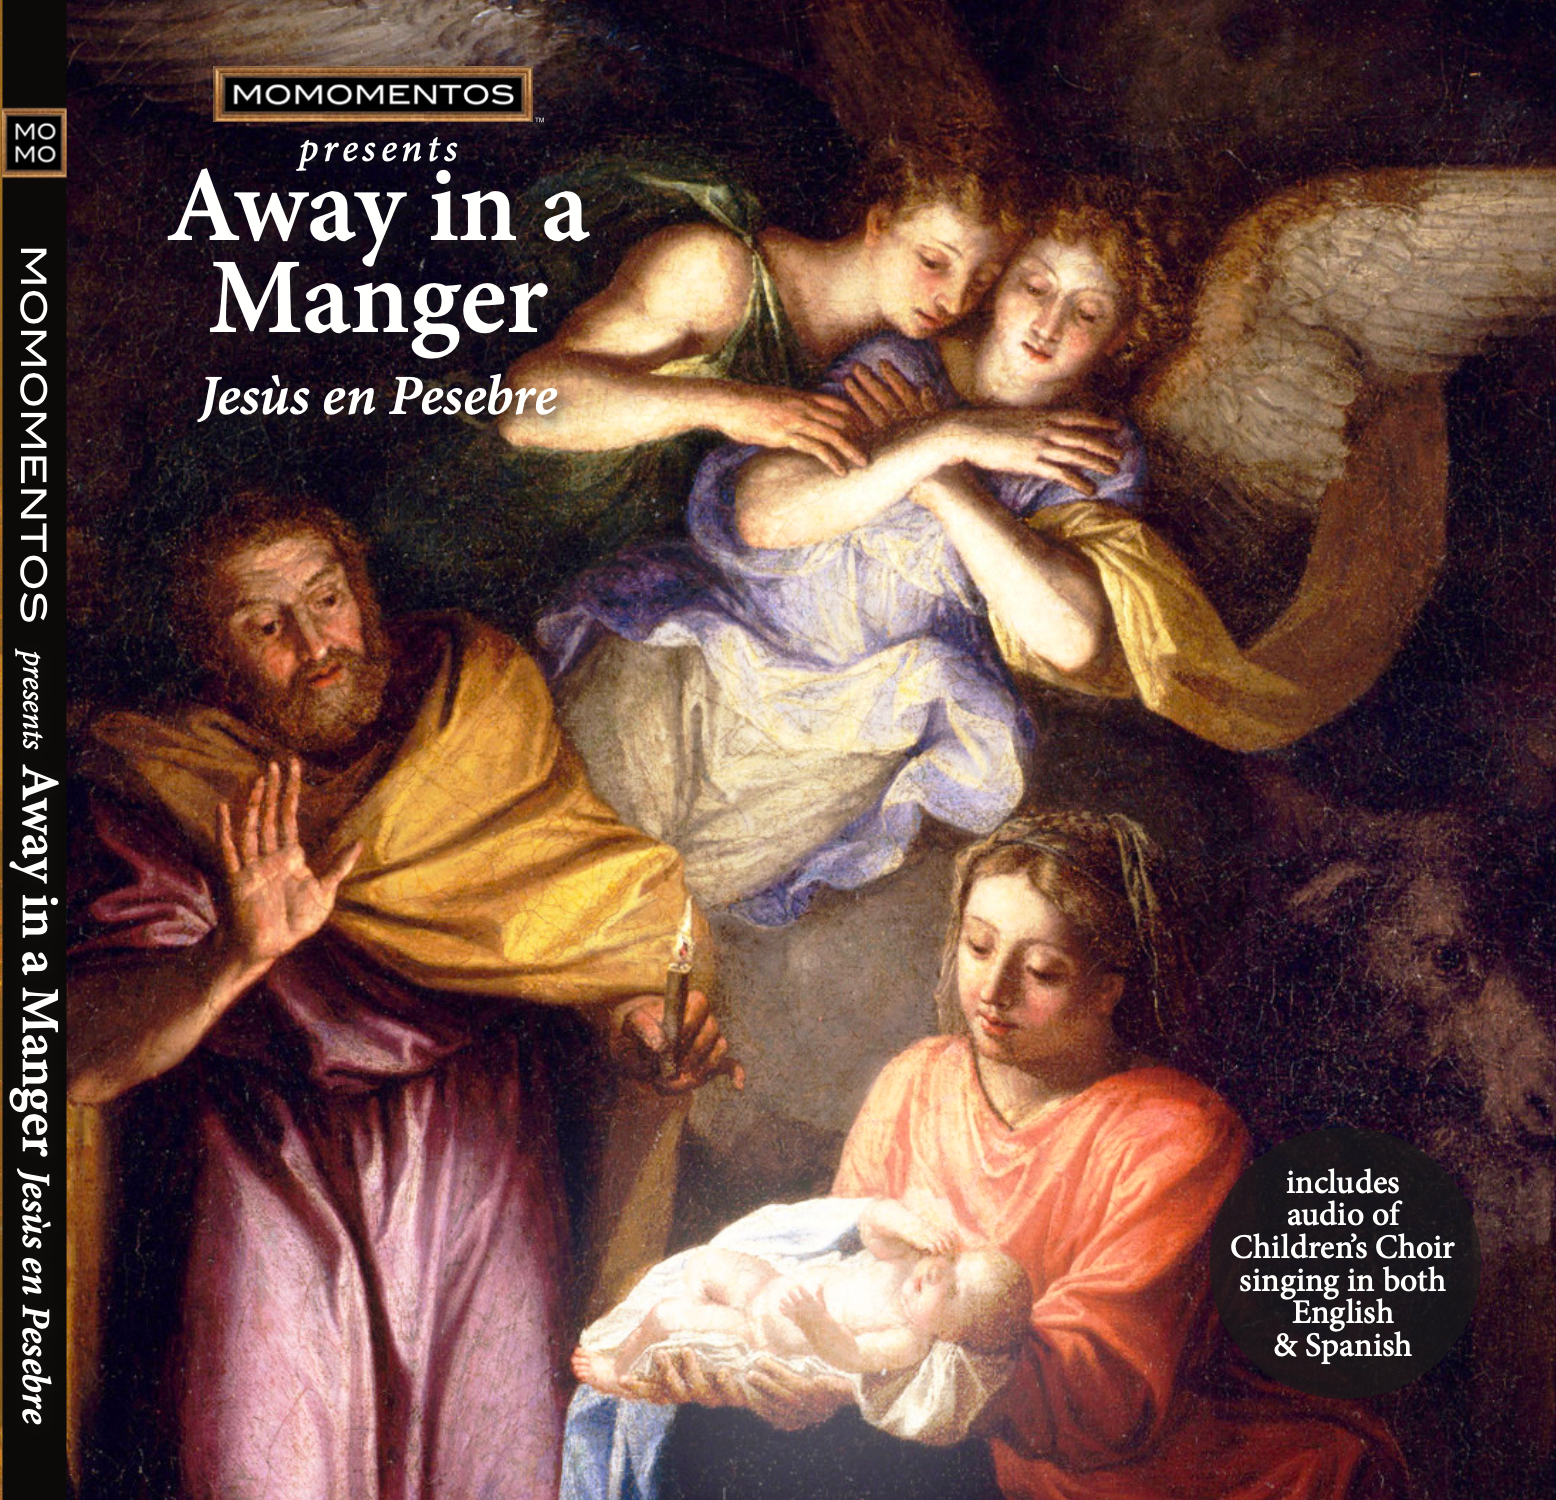 AWAY IN A MANGER- eBOOKS - click ENGLISH or SPANISH